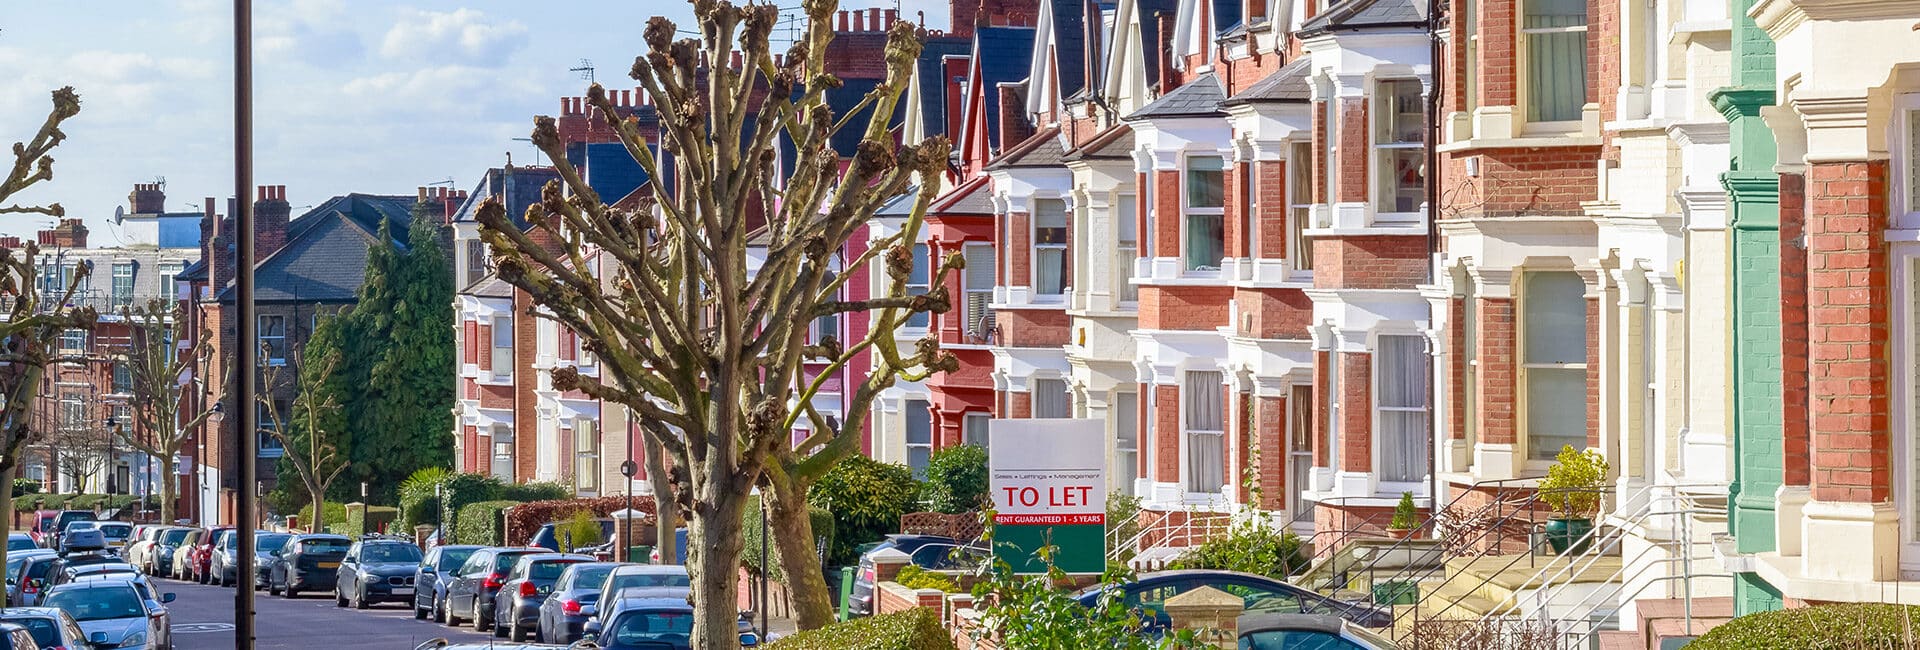 The UK Property Market: A 3-Part Series For International Investors